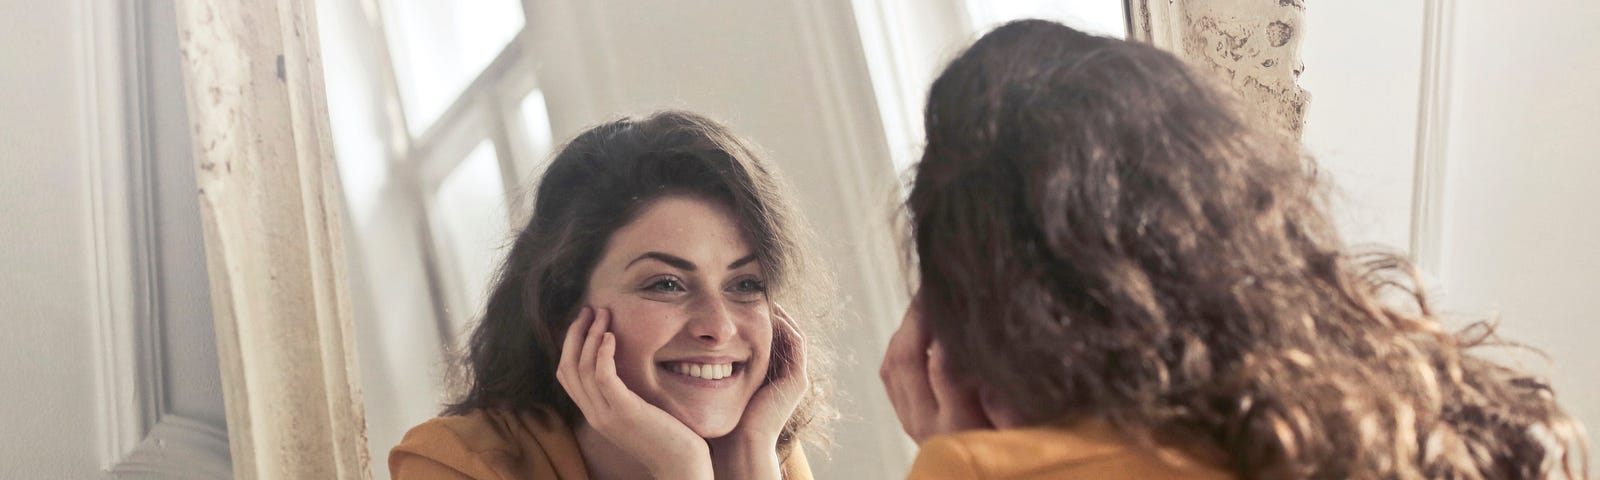 A young lady smiling lovingly at her own reflection in the mirror